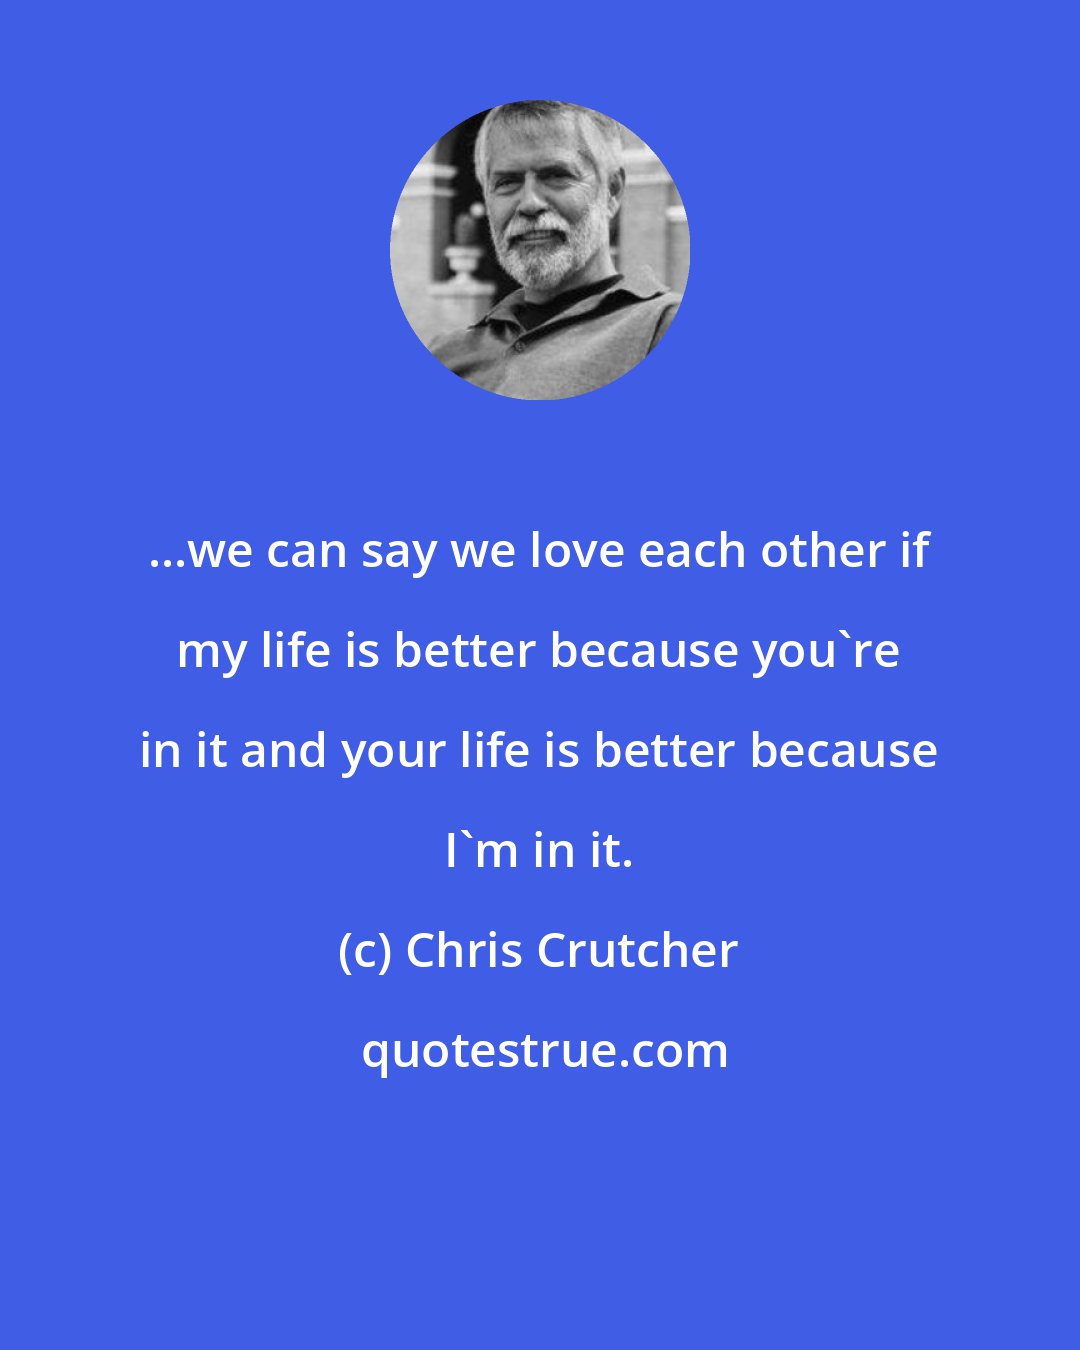 Chris Crutcher: ...we can say we love each other if my life is better because you're in it and your life is better because I'm in it.